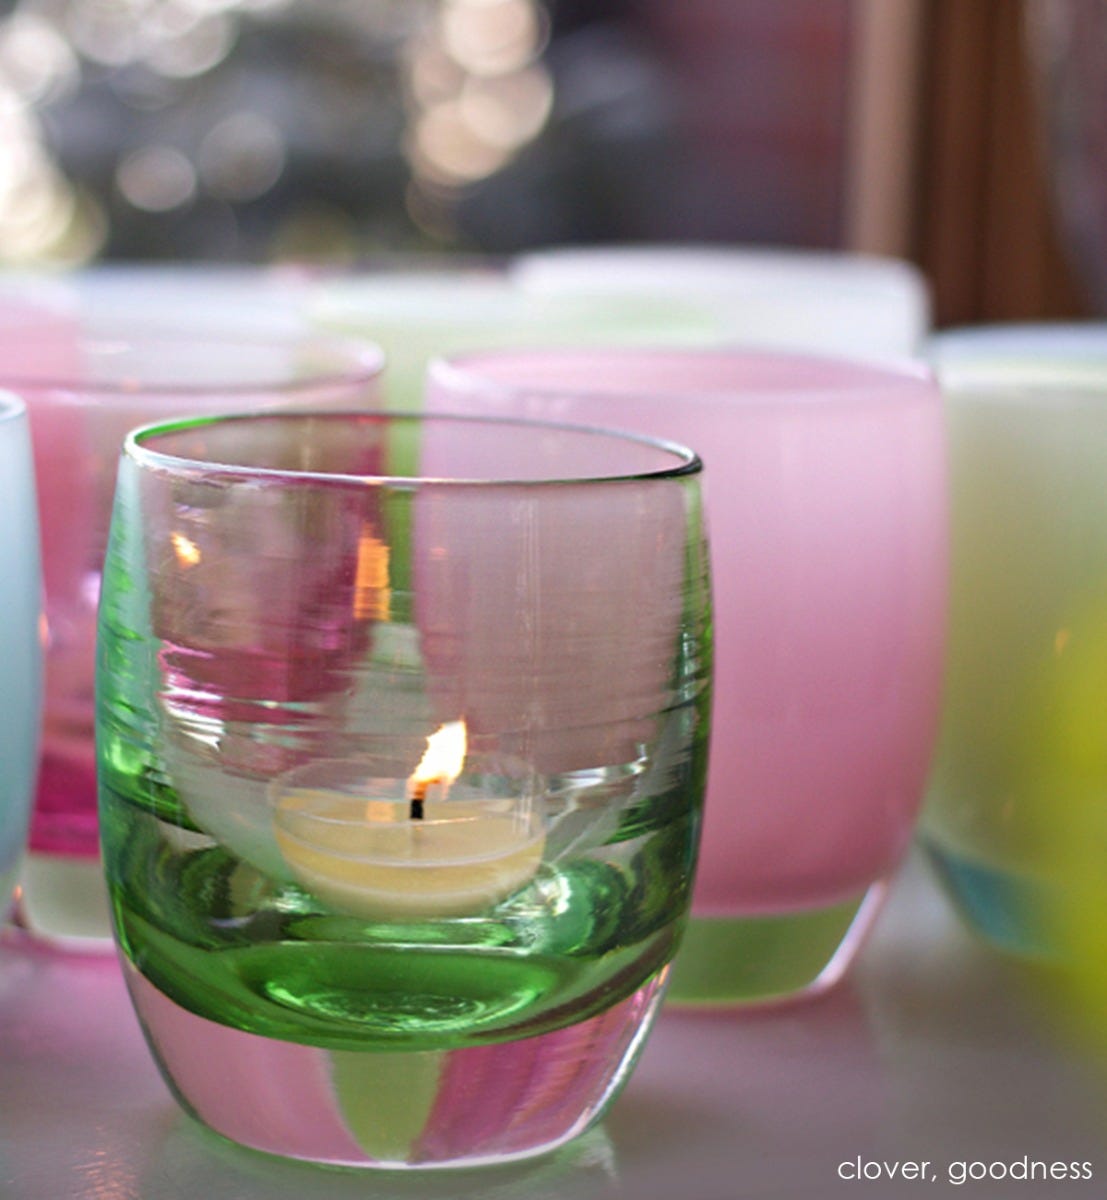 clover transparent light green hand-blown glass votive candle holder. Paired with goodness.